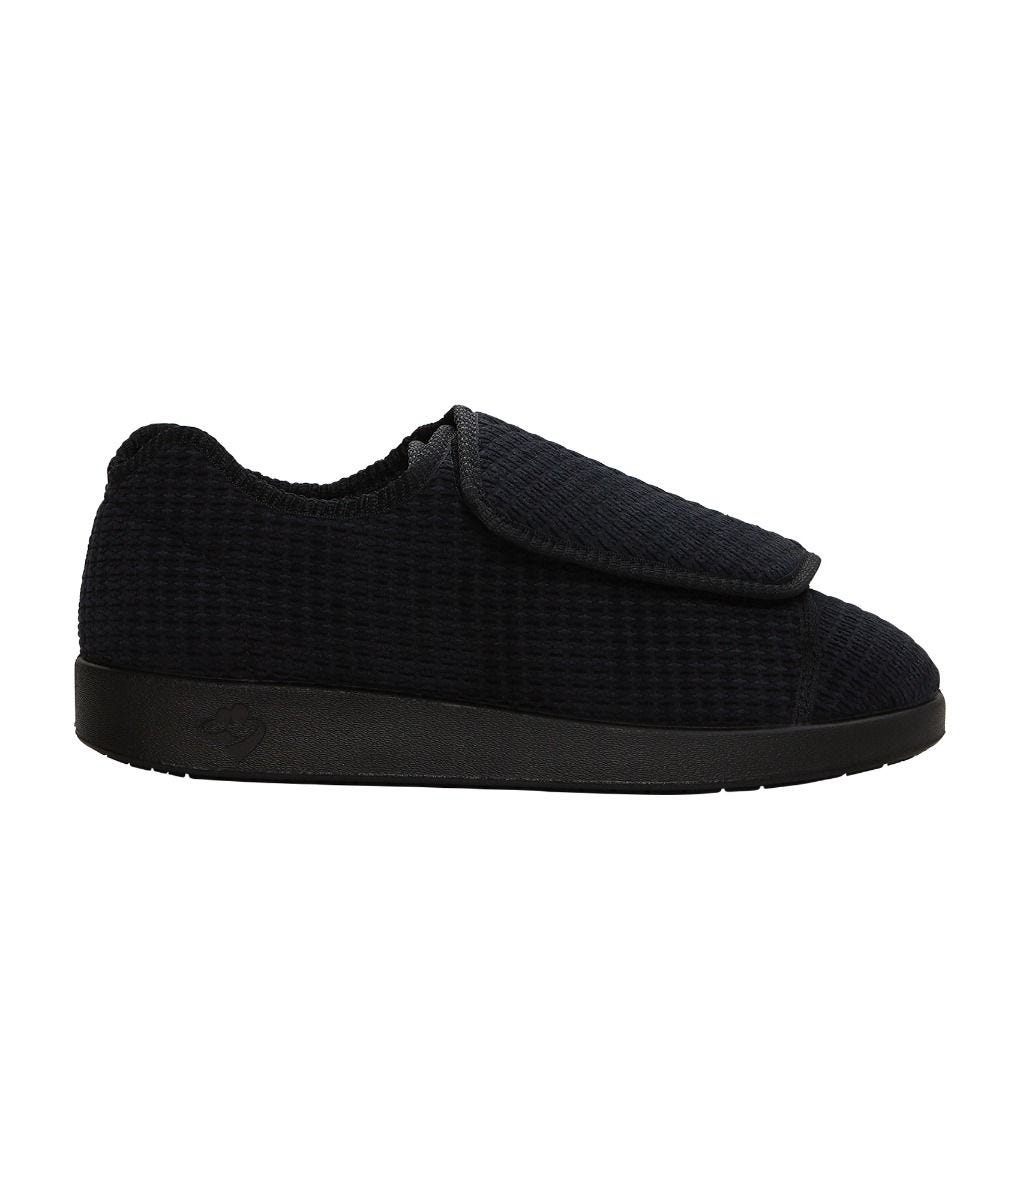 Side of wide black indoor slippers with large Velcro closures at top for adjustable fit